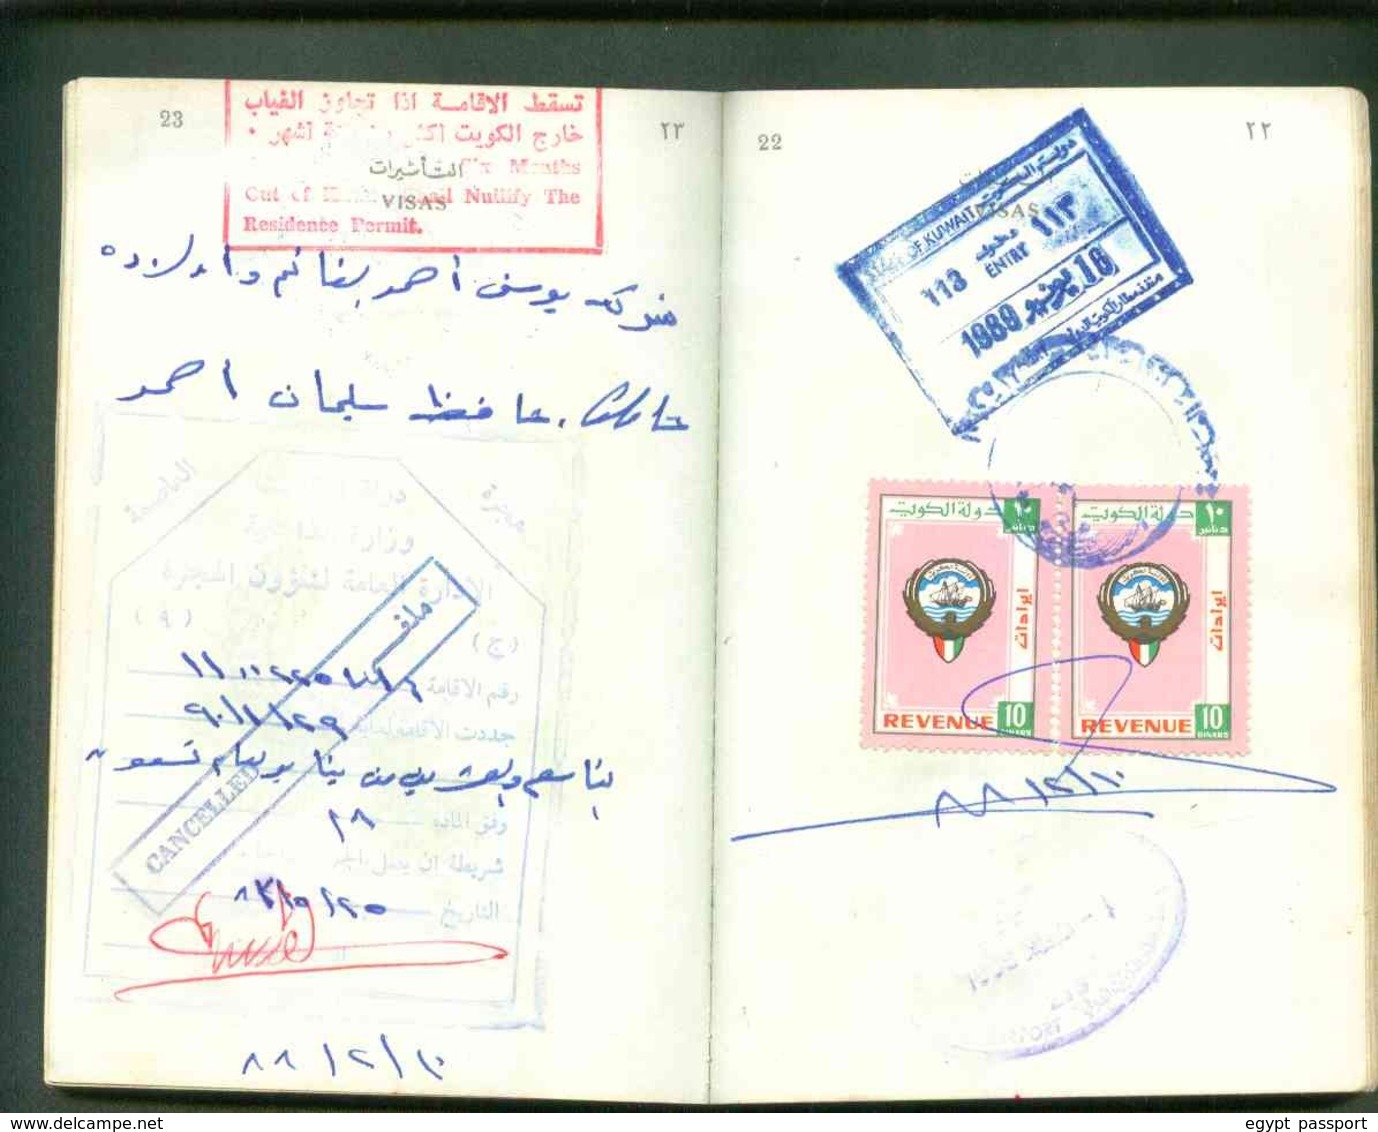 Kuwait and Egypt revenue stamps collection on complete passport - Condition as in Scan